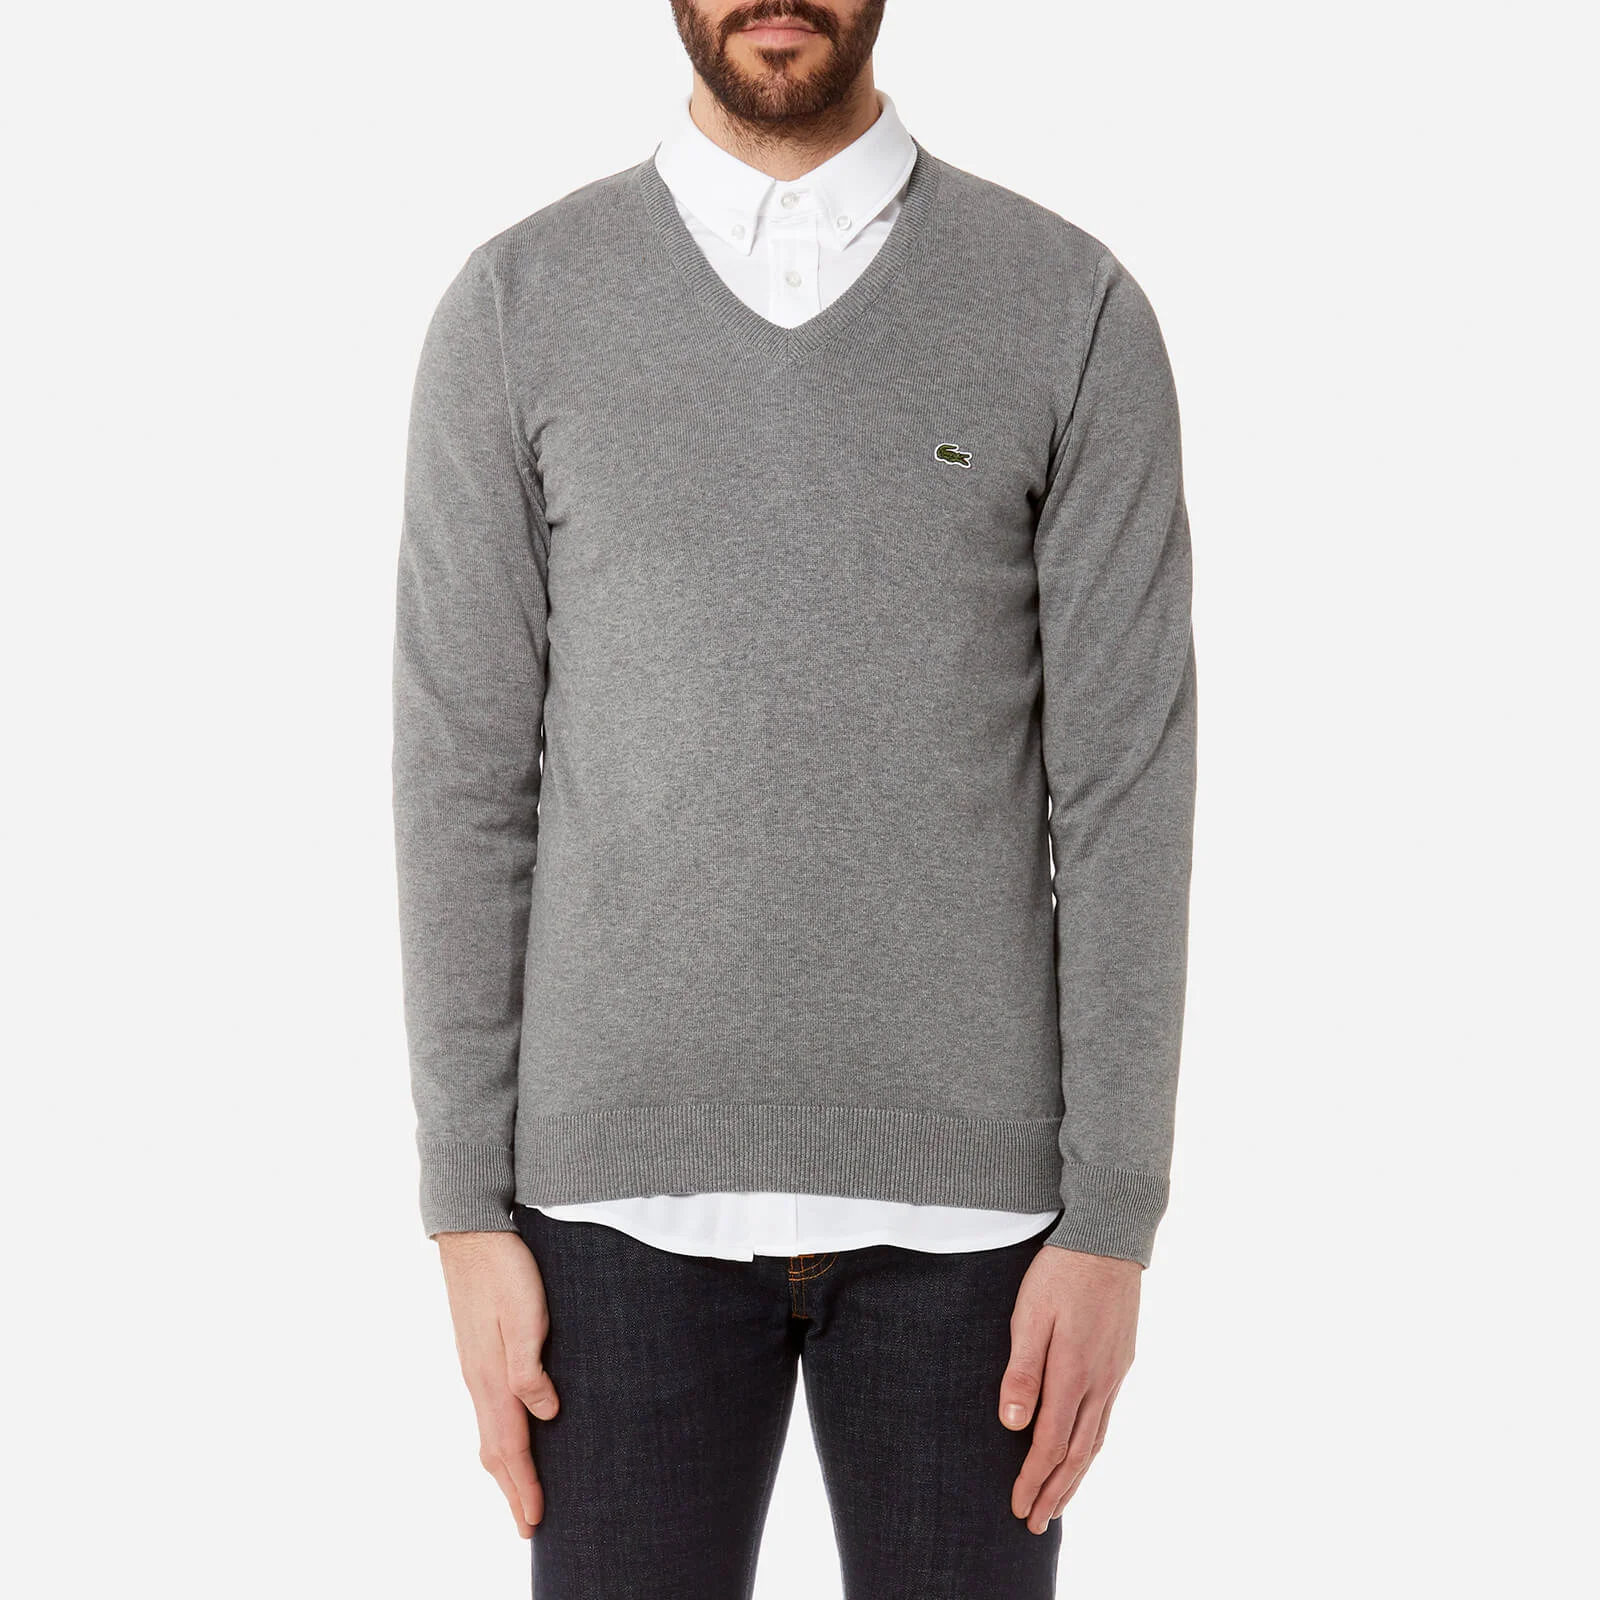 Lacoste Men's V-Neck Knitted Jumper - Galaxite Chine Image 1